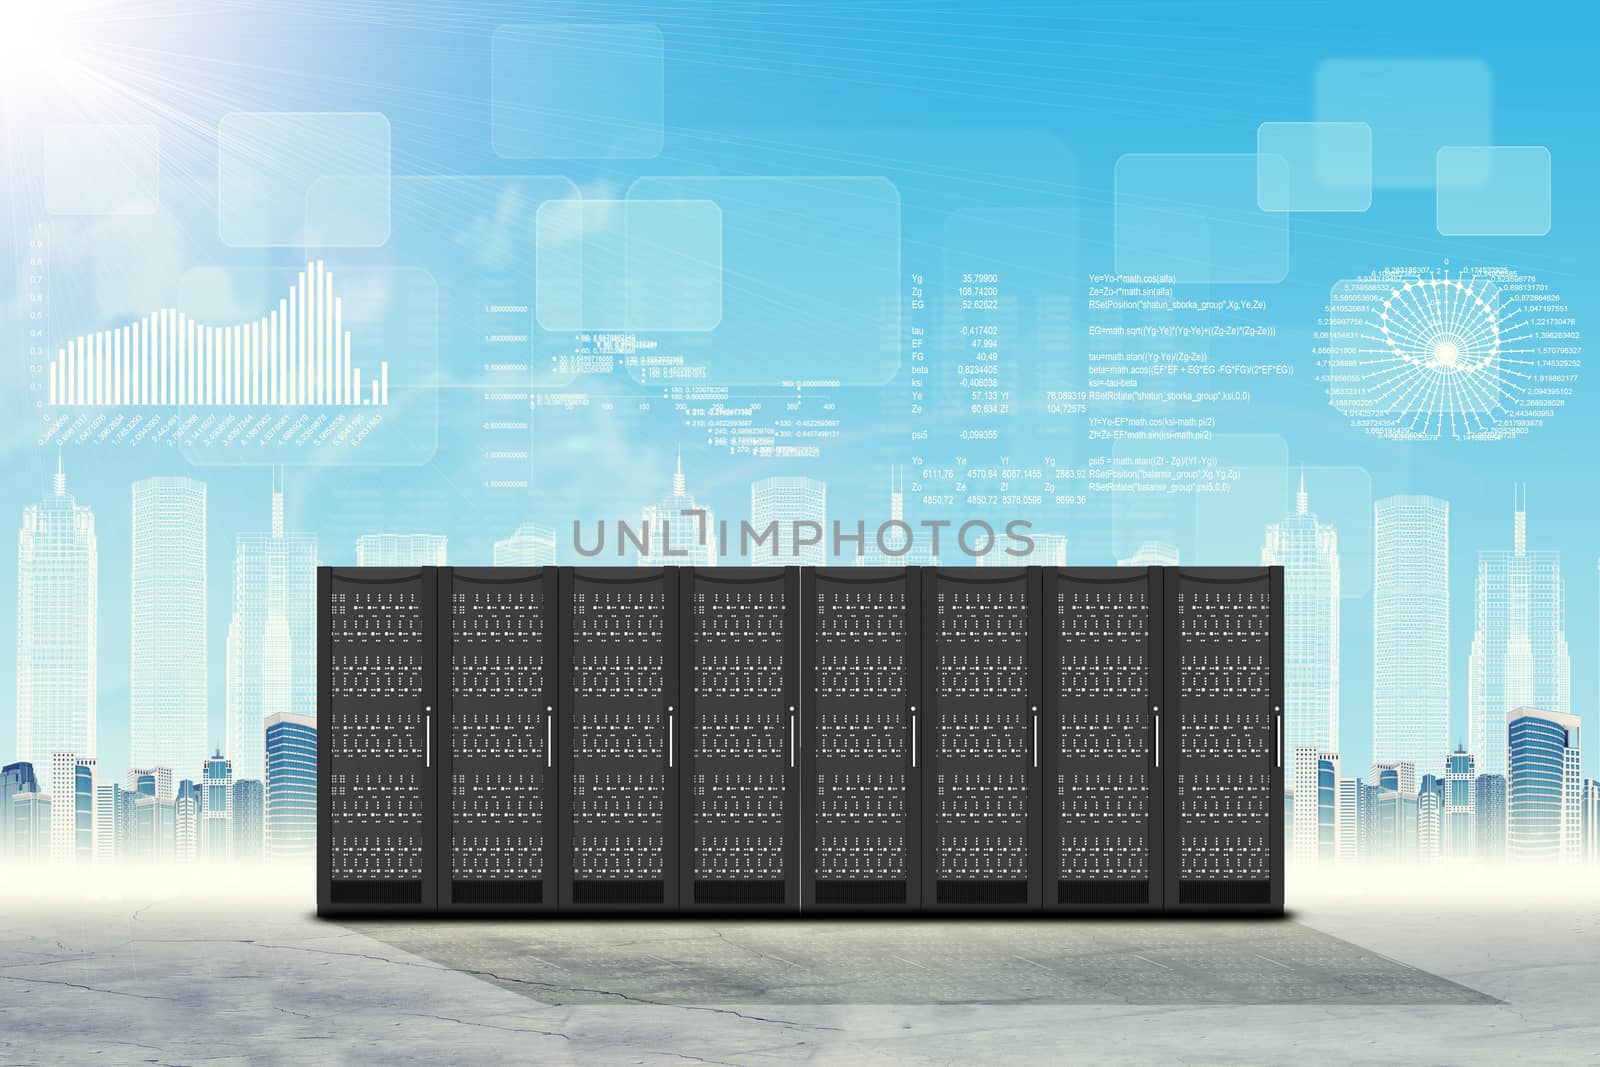 Set of steel lockers on abstract cityscape background with graphs